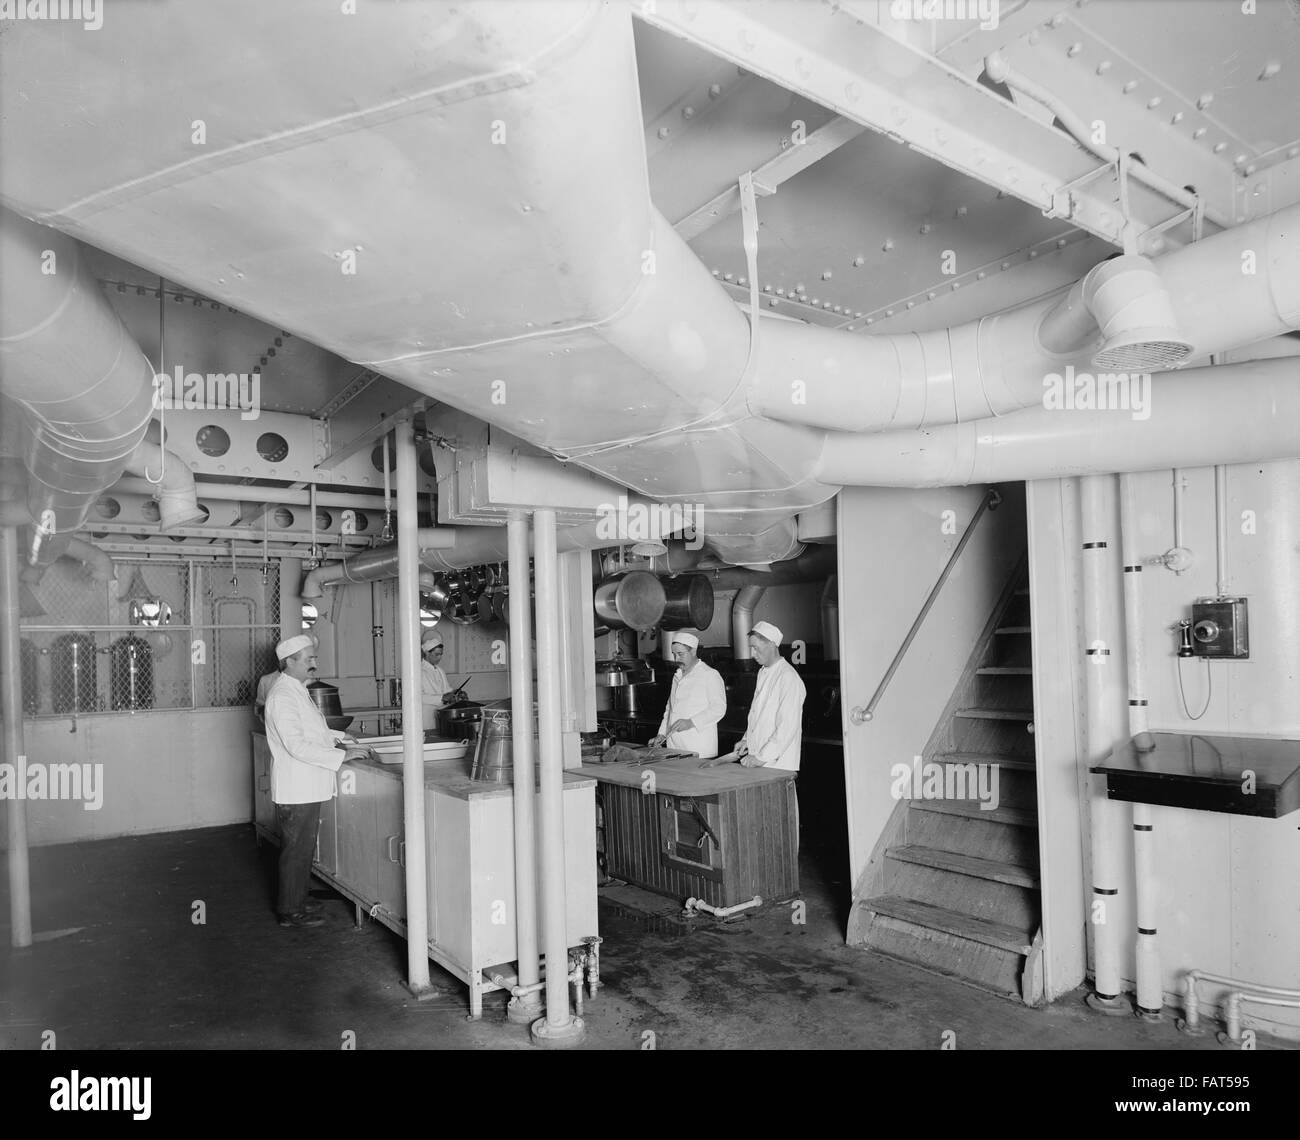 Cooks in Galley, Steamer, City of Cleveland, 1908 Stock Photo